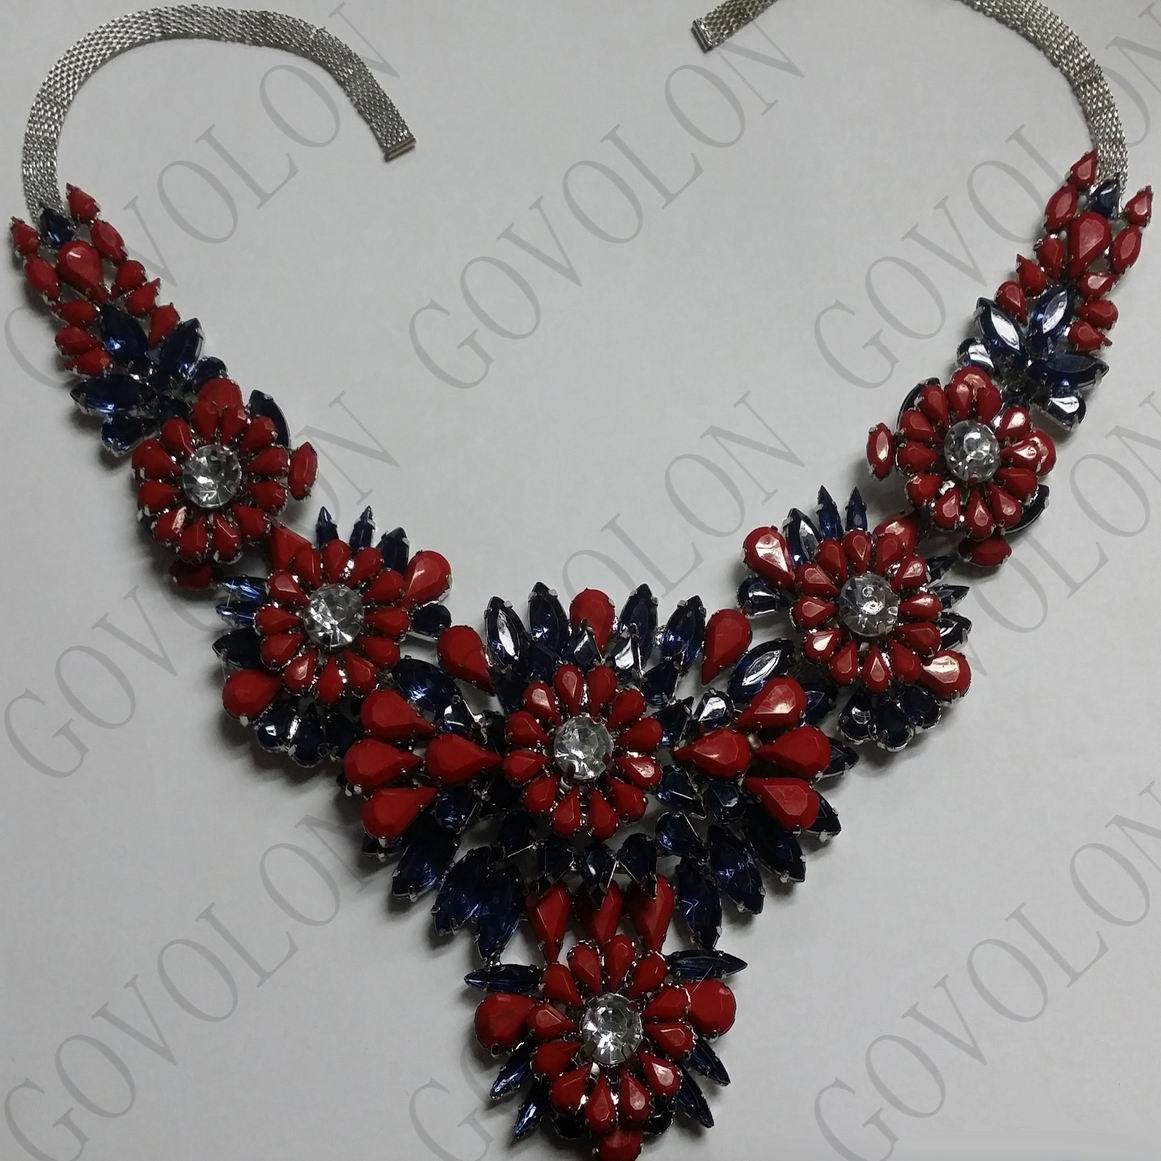 Latest Fashion Resin Necklace